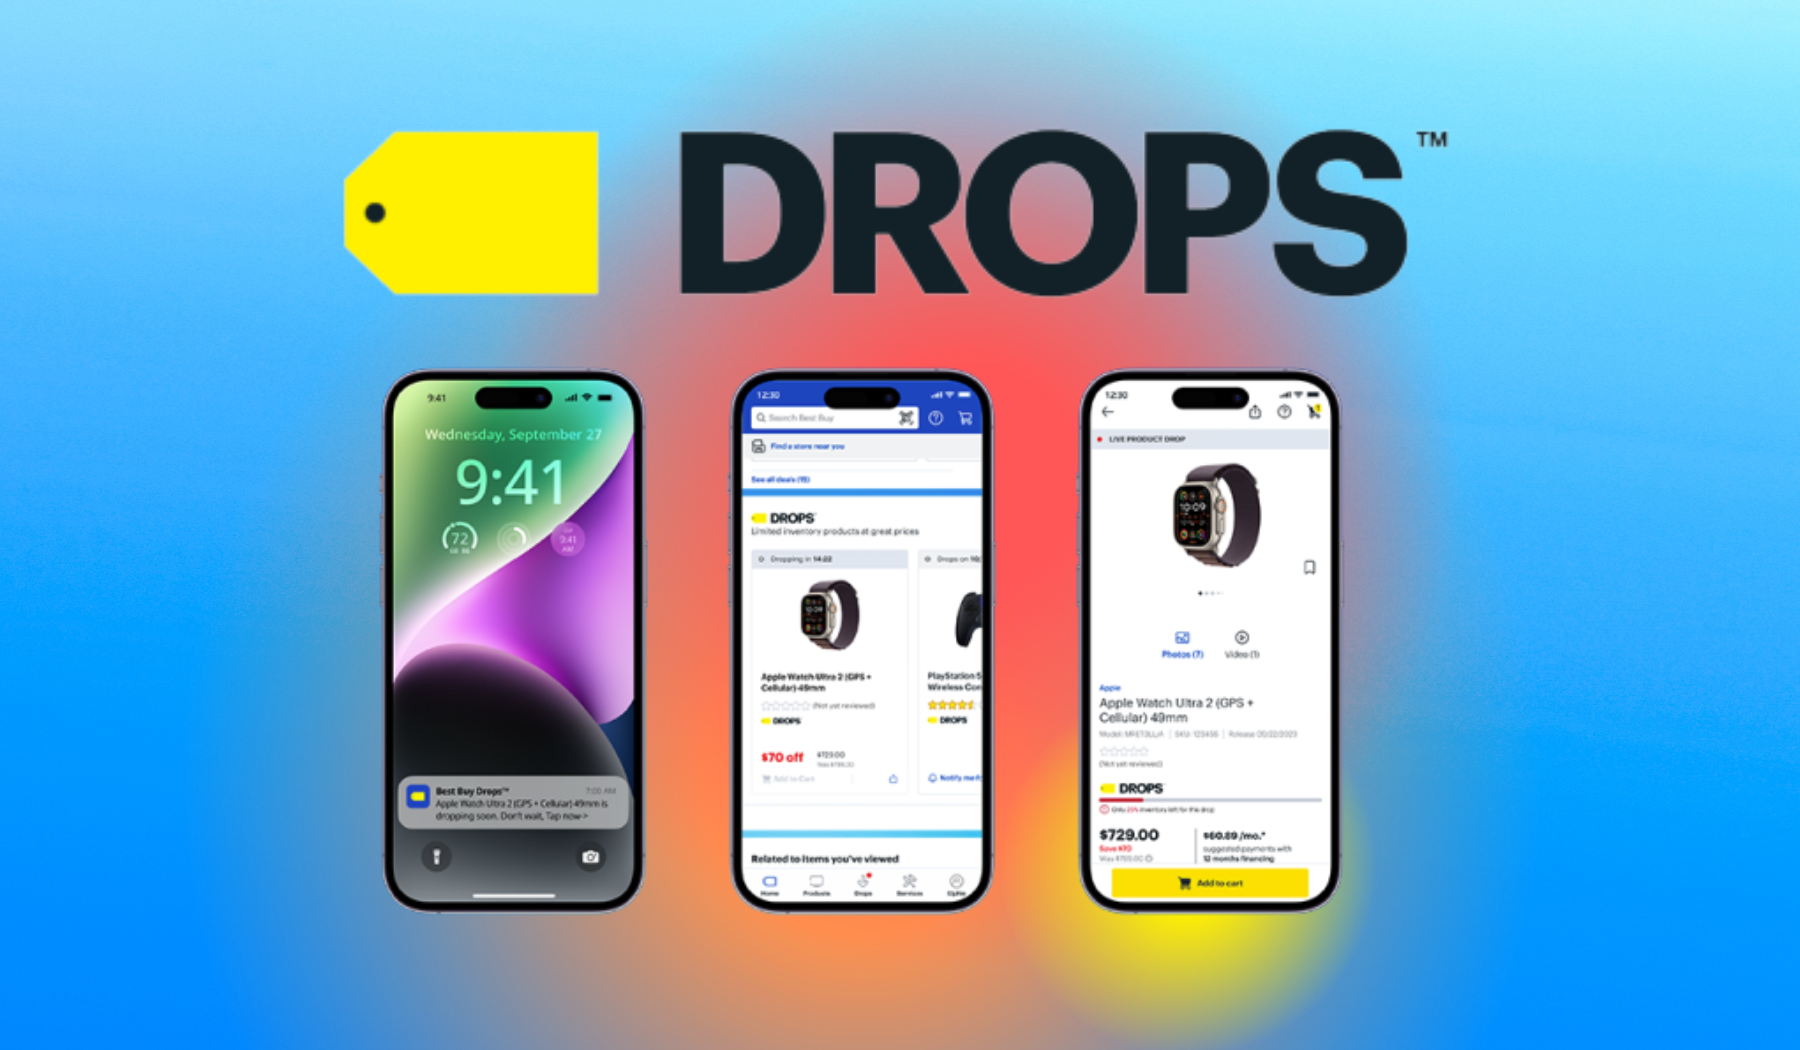 Best Buy Drops logo and three smartphones with products from the My Best Buy app on colorful background